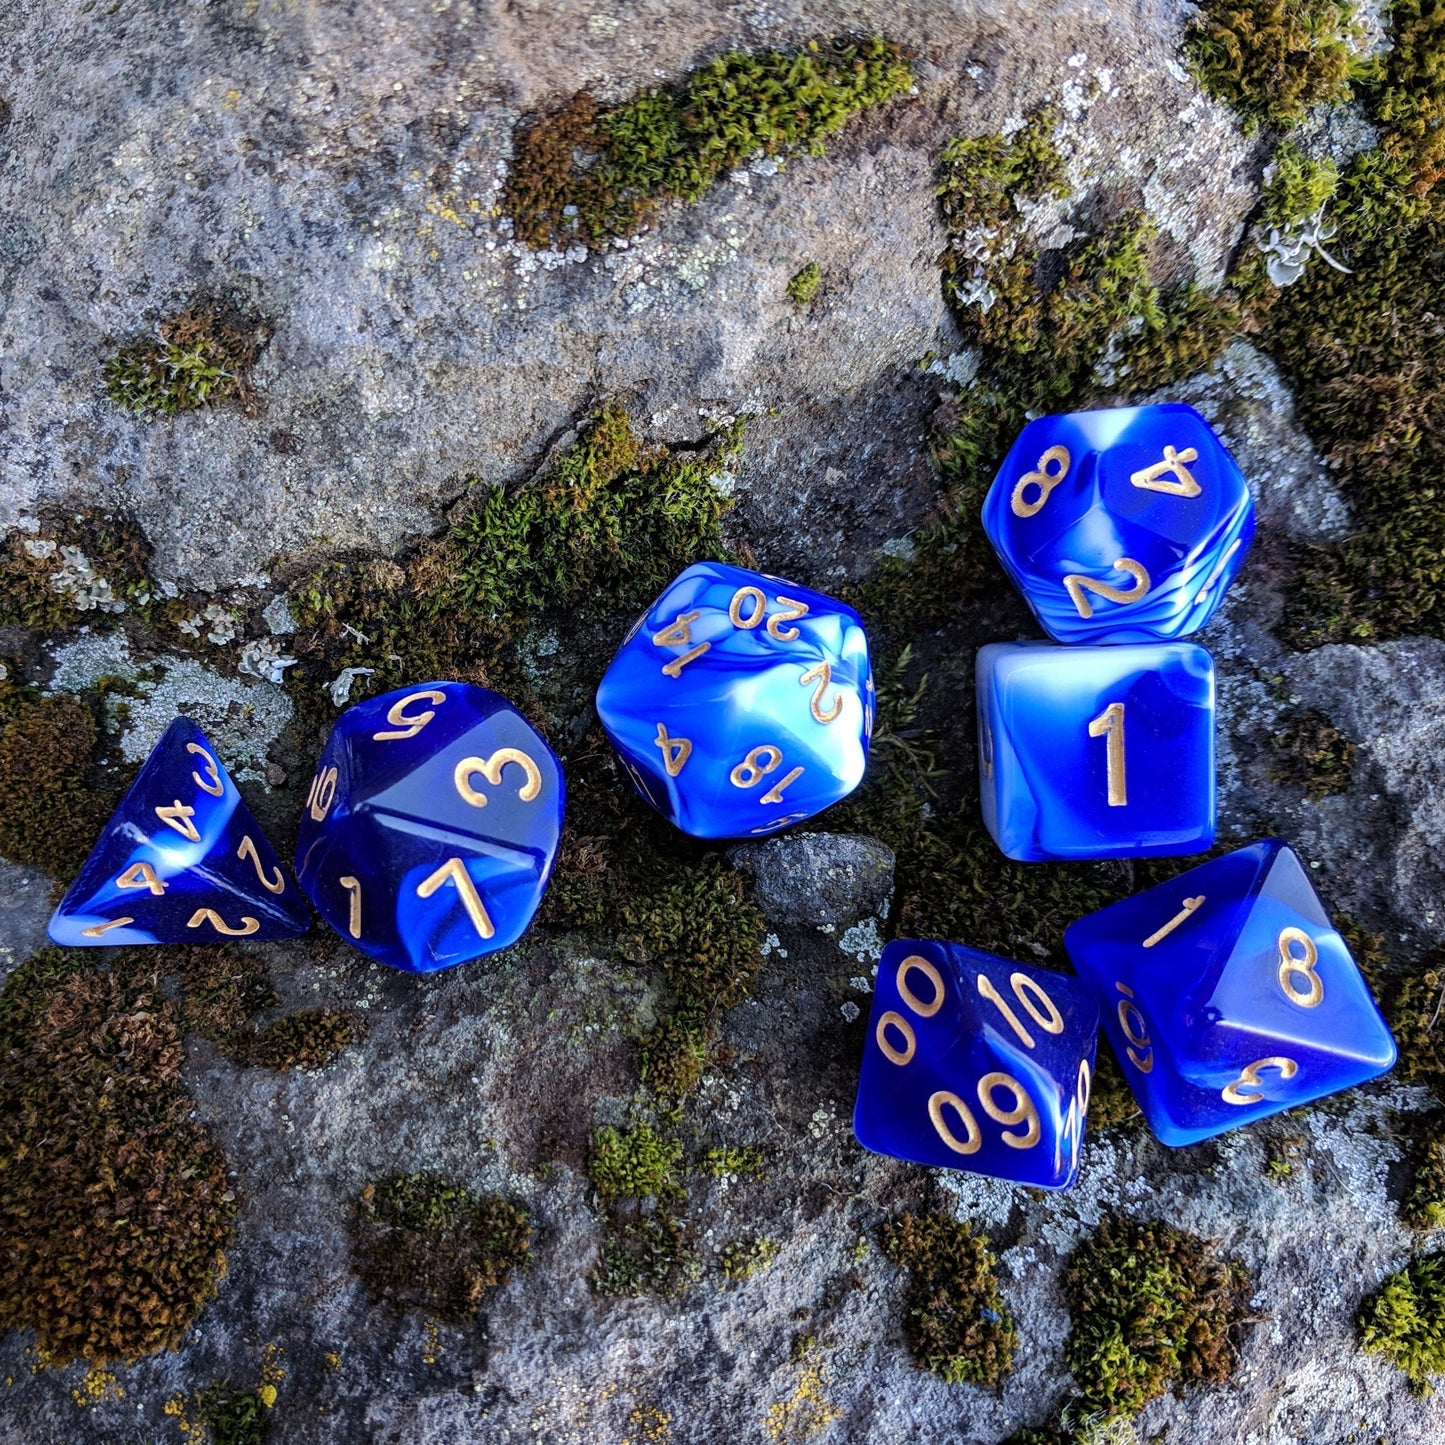 FREE Today: Force Field DnD Dice Set